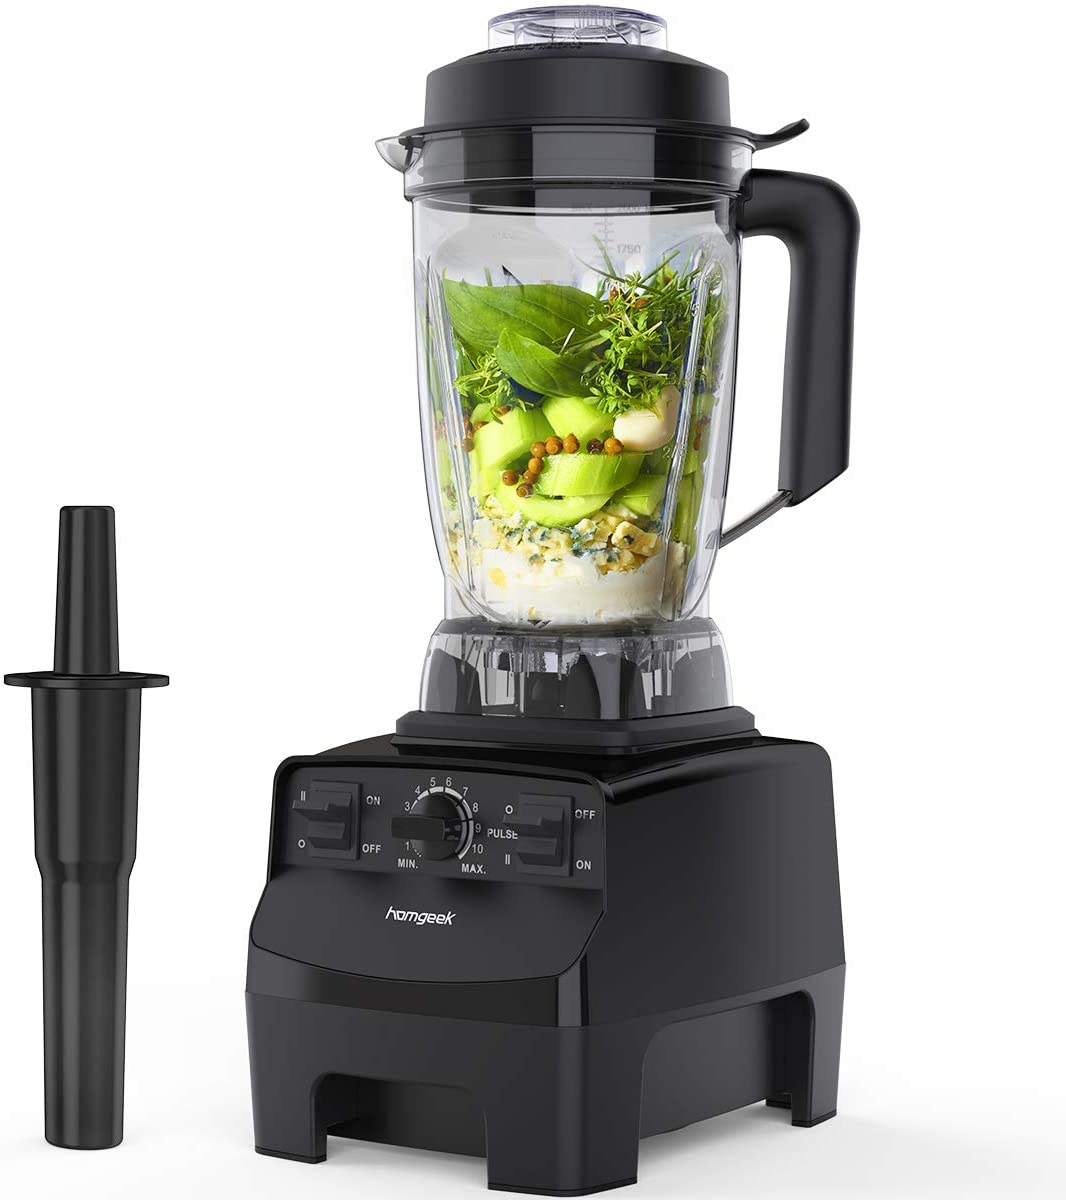 Homgeek blender, 1450W high speed professional table mixer, suitable for milkshakes and smoothies, 30000 rpm, built-in pulse and 10 speed control - image 1 of 7